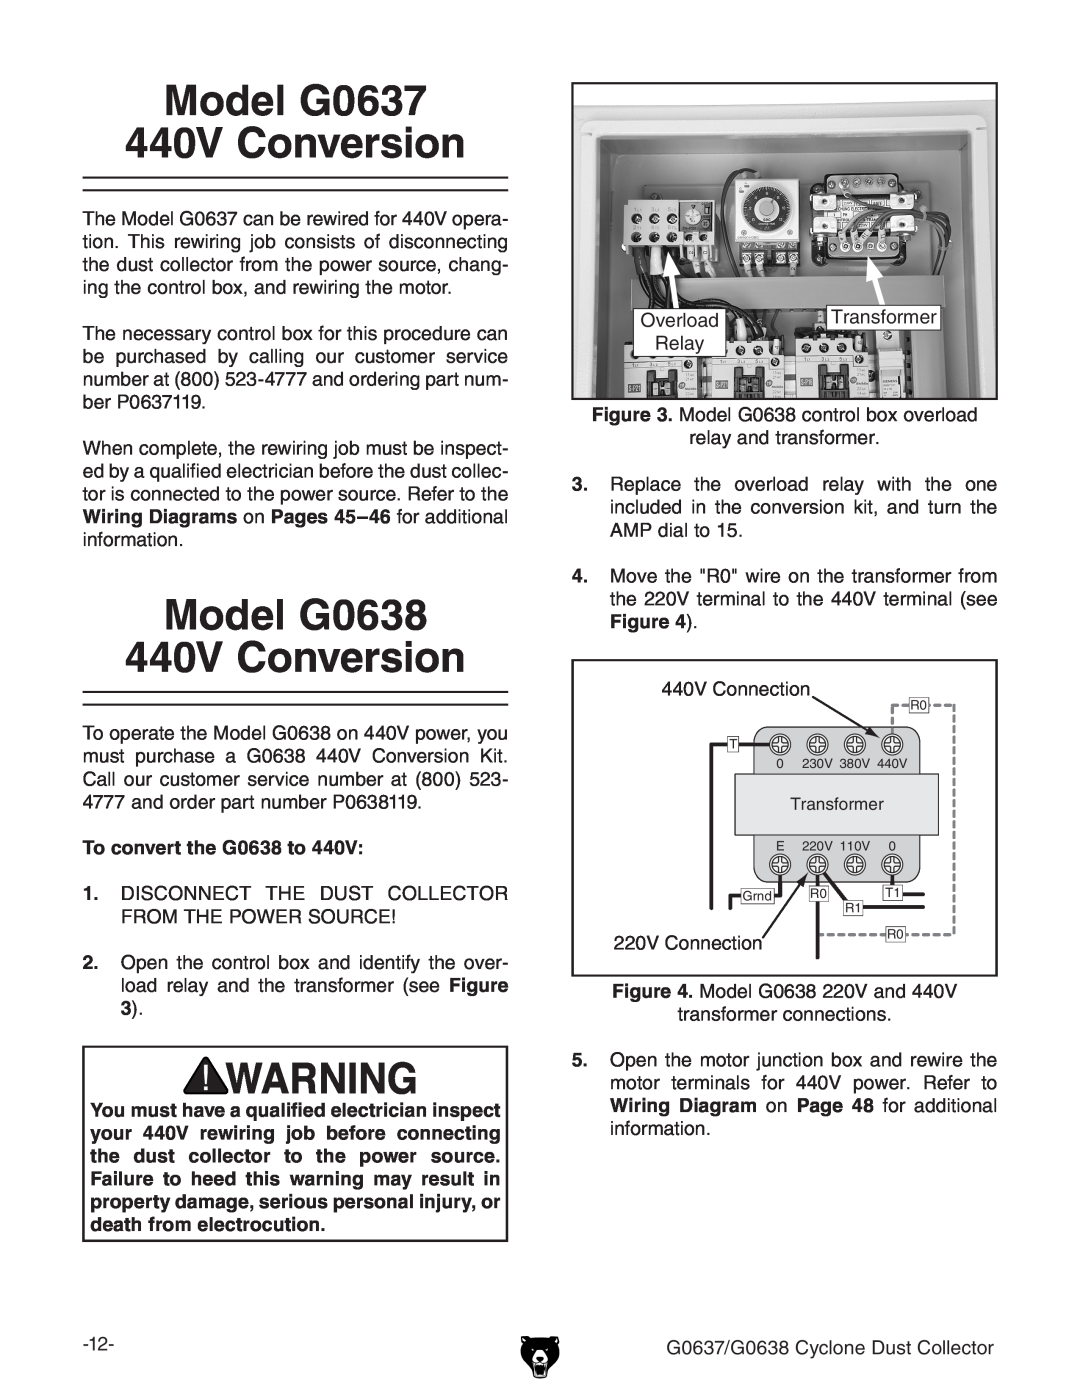 Grizzly owner manual Model G0637 440V Conversion, Model G0638 440V Conversion, conversion, To convert the G0638 to 